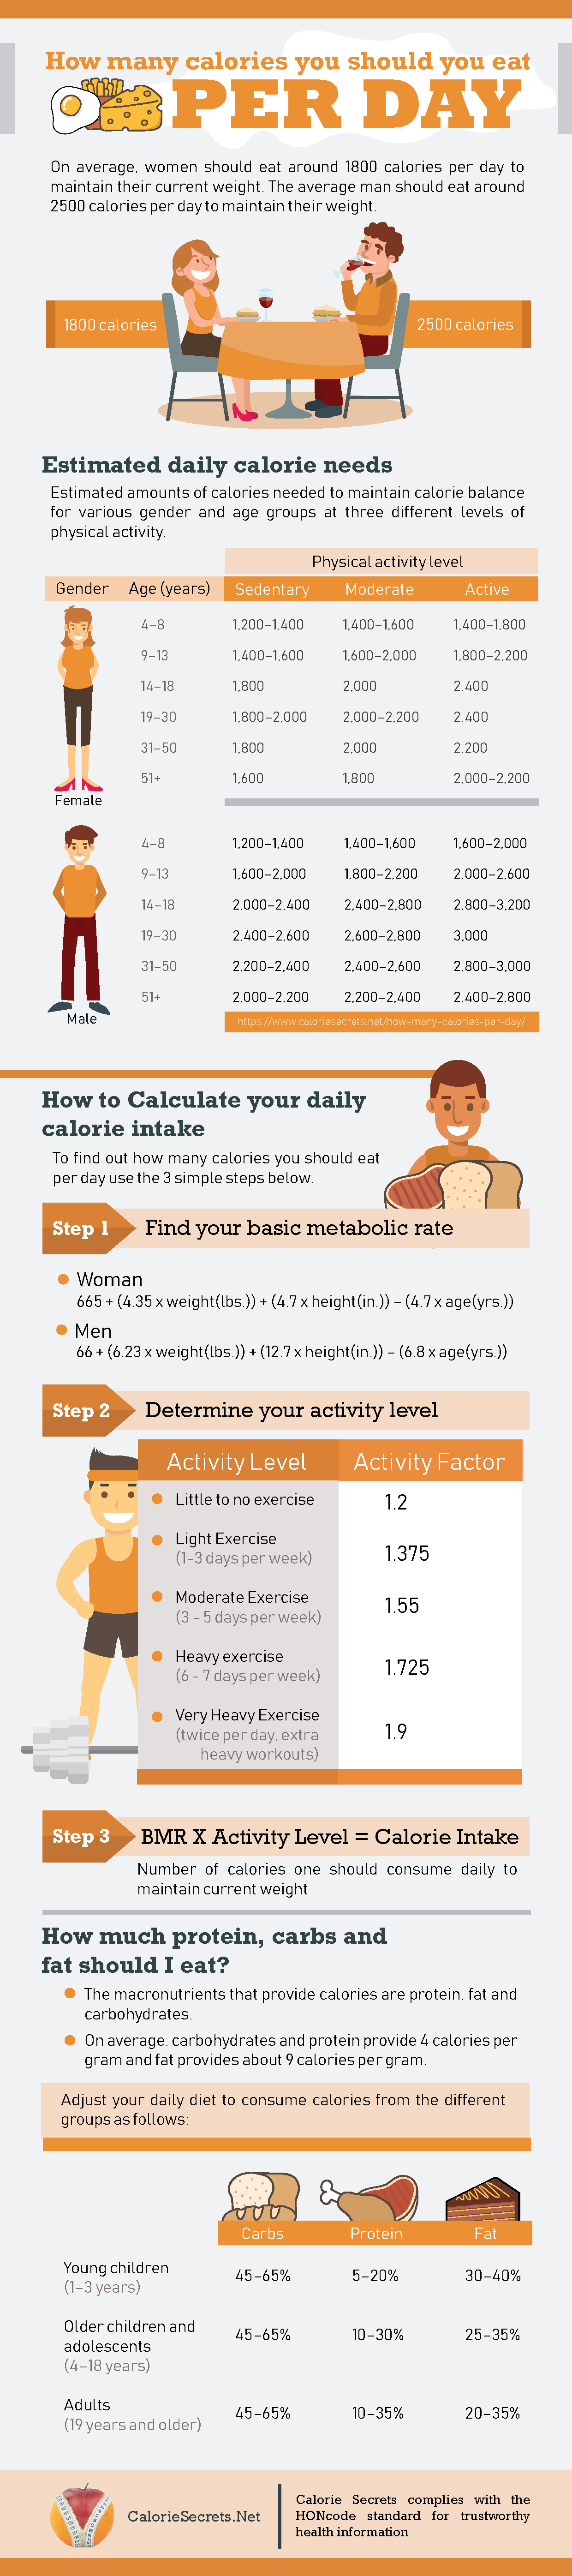 how many calories should i eat a day to lose weight? - calorie secrets